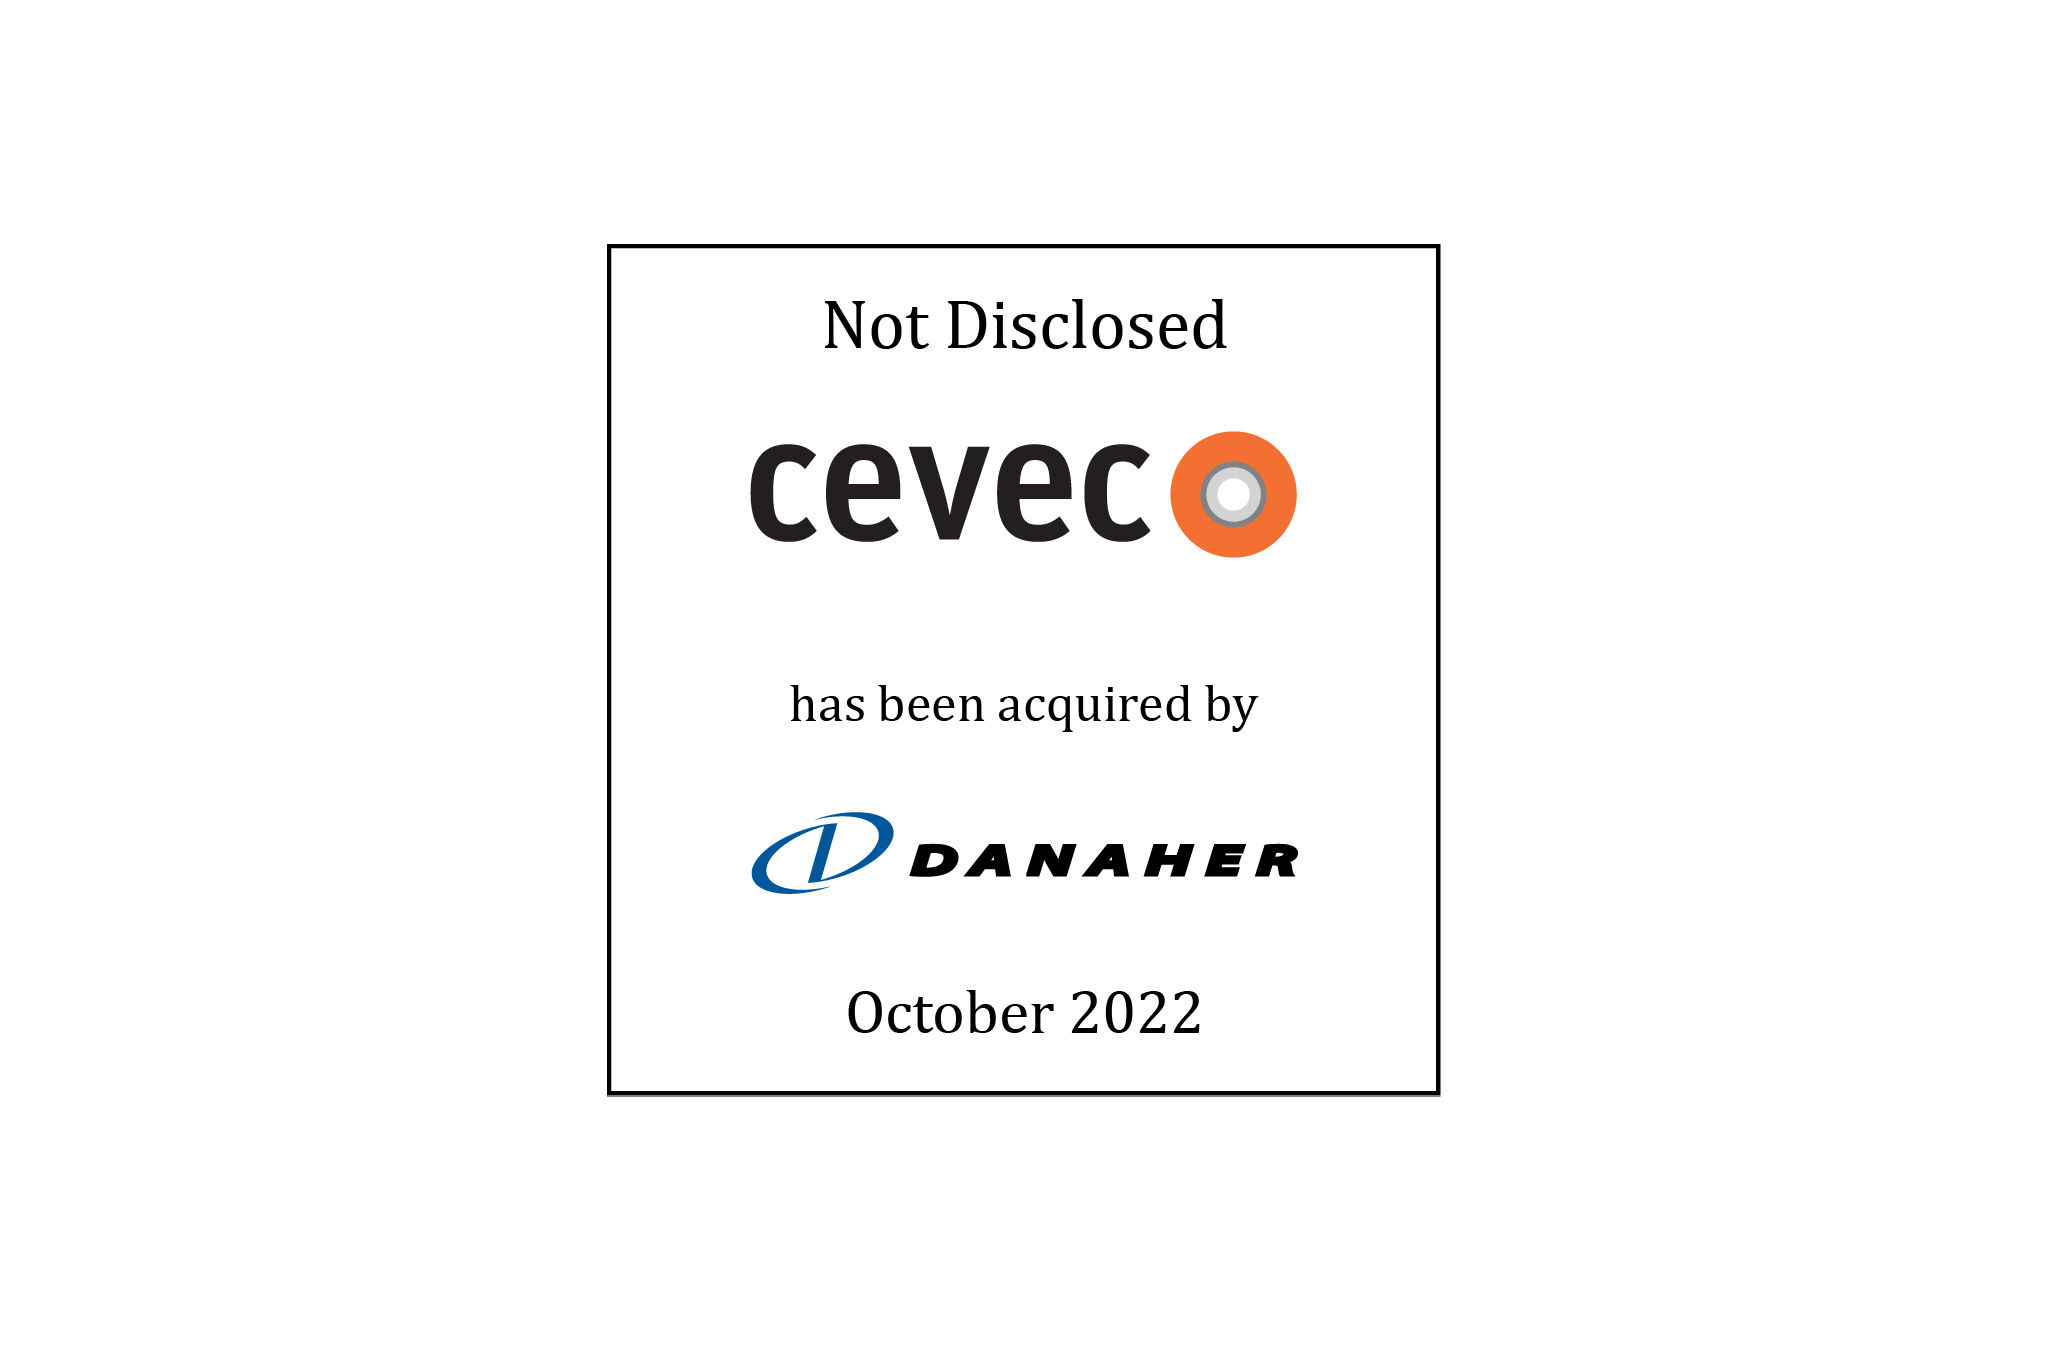 Not Disclosed | CEVEC (logo) Has Been Acquired by Danaher (logo) | October 2022